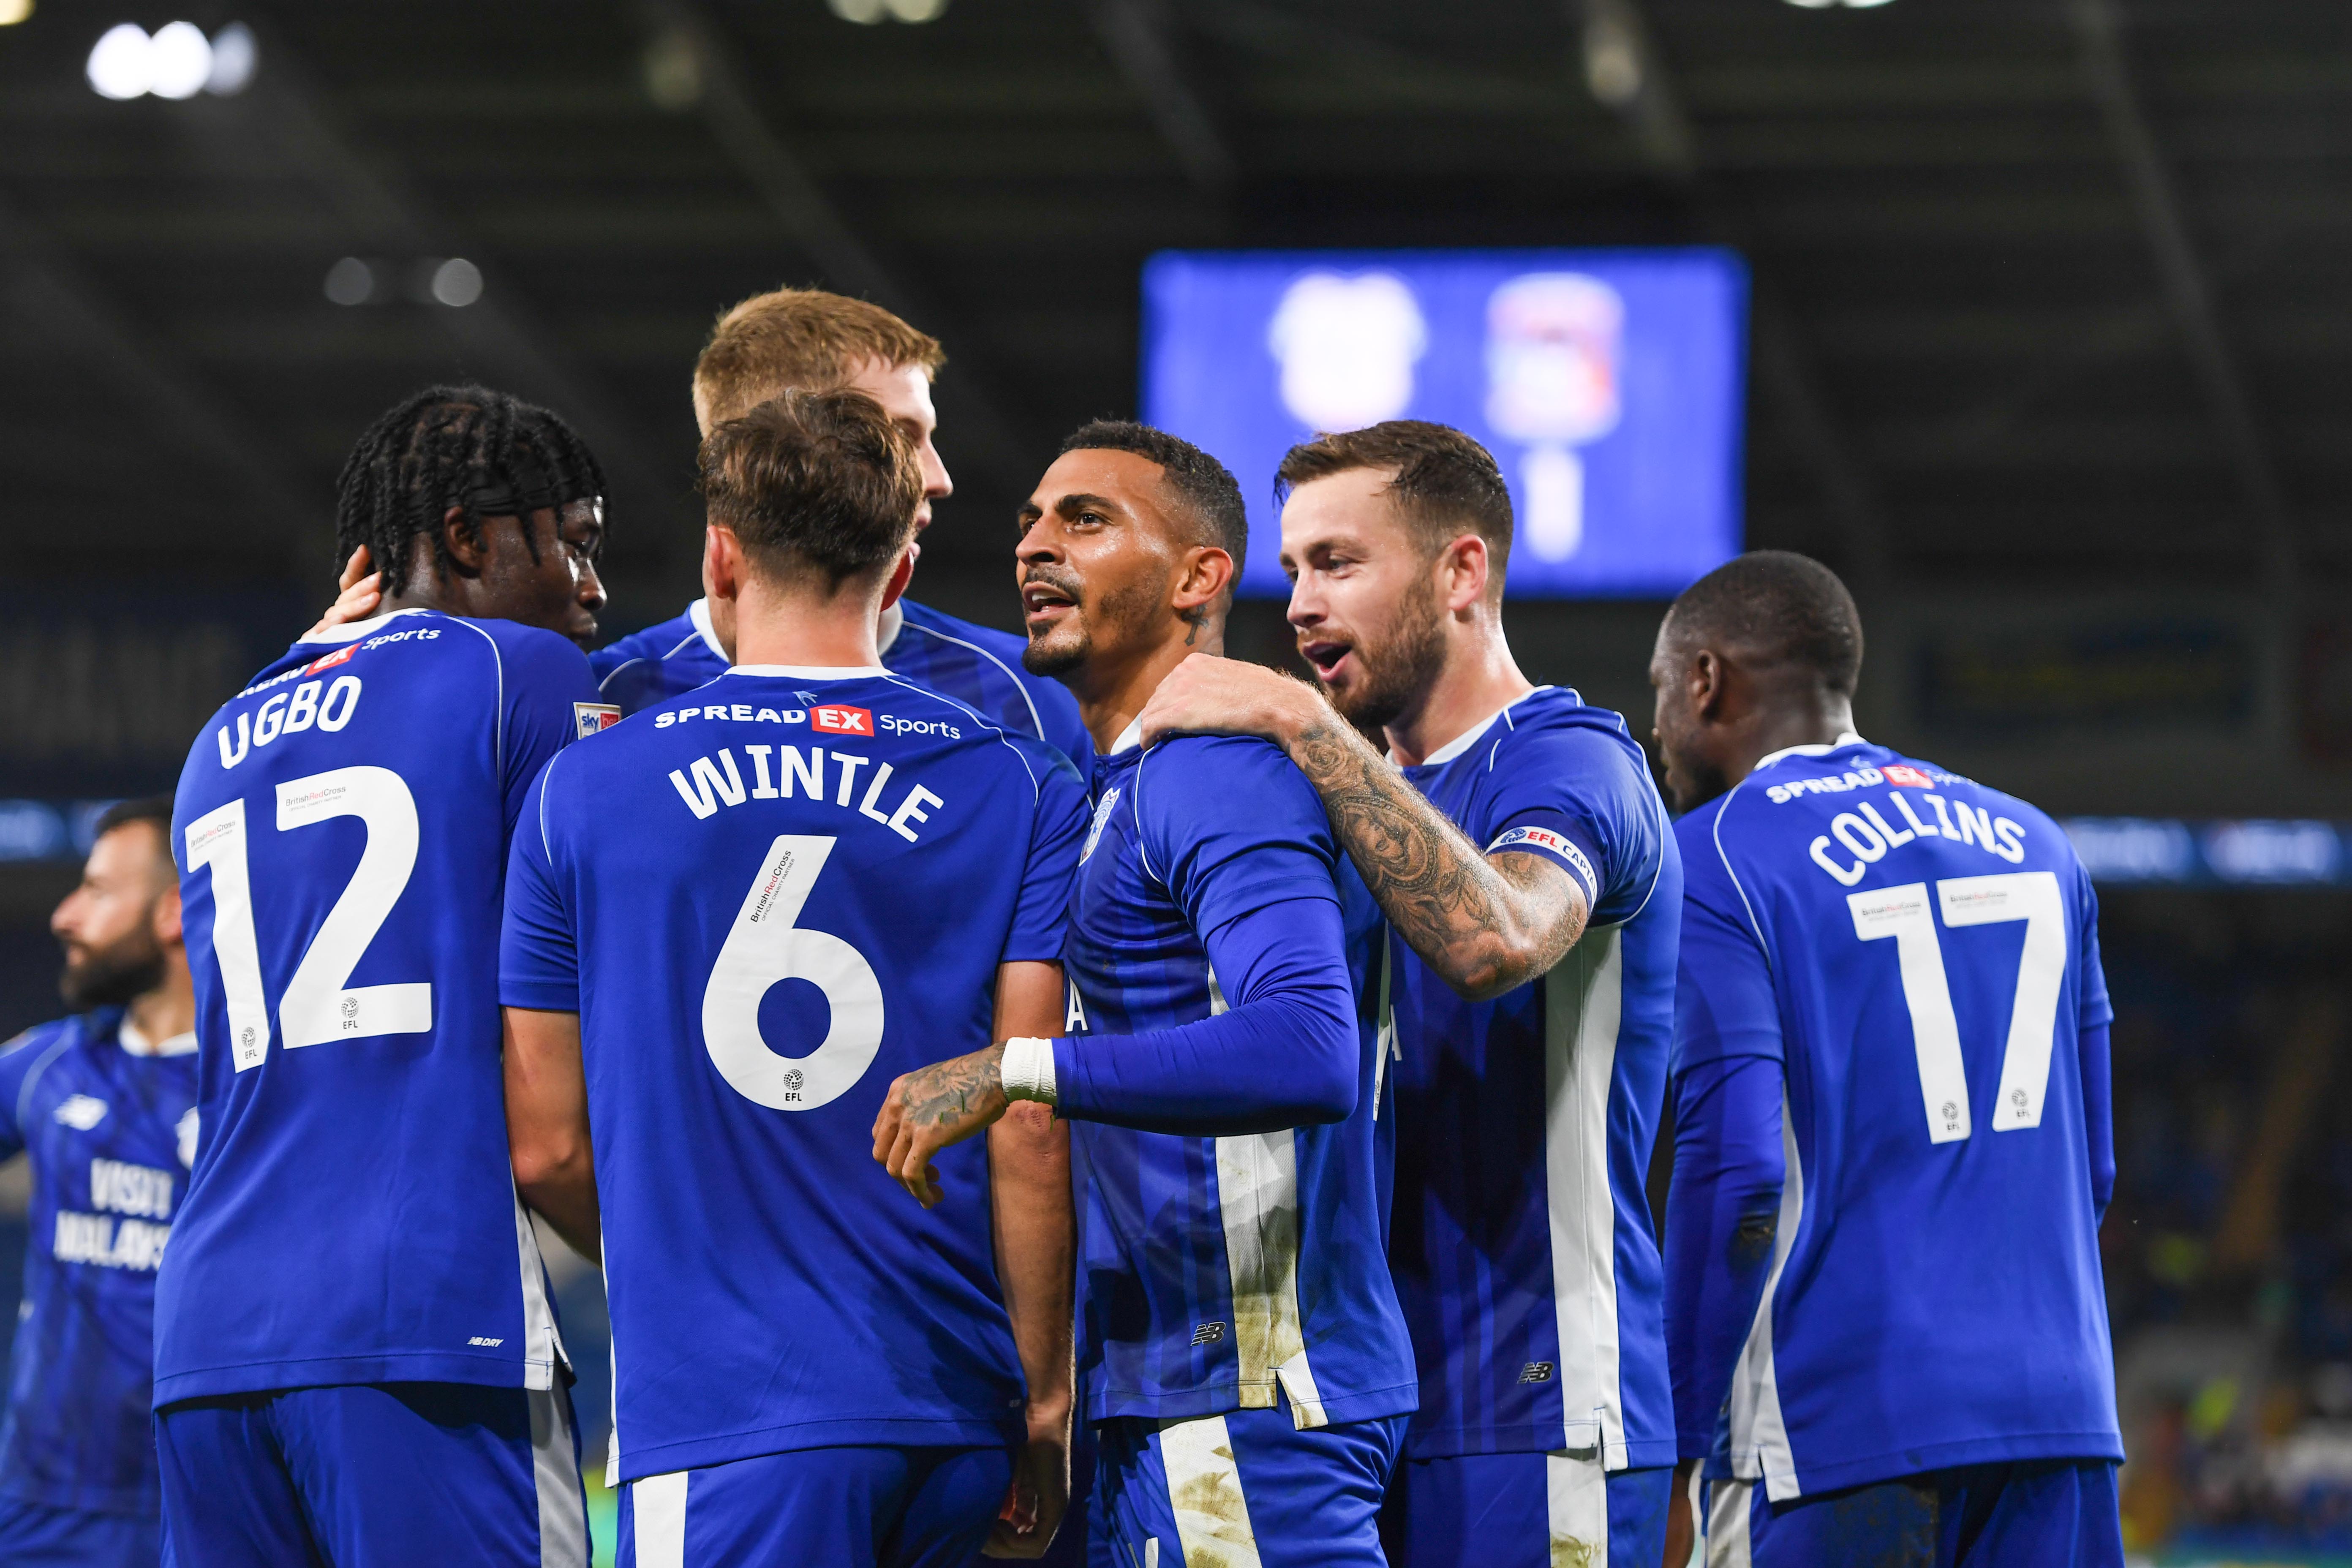 Cardiff City celebrate taking the lead against Coventry City